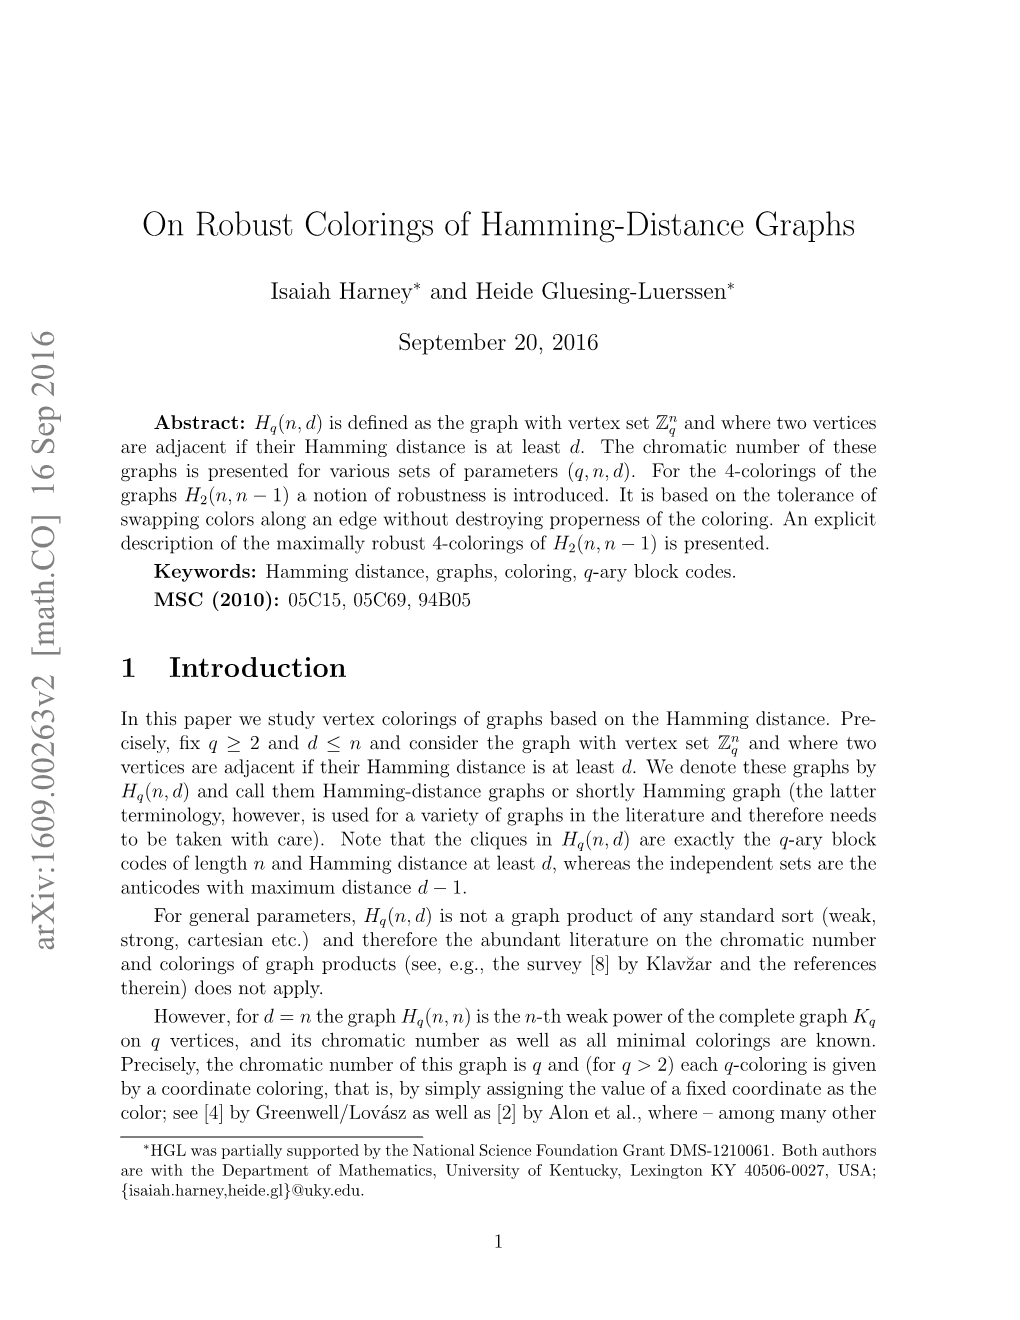 On Robust Colorings of Hamming-Distance Graphs